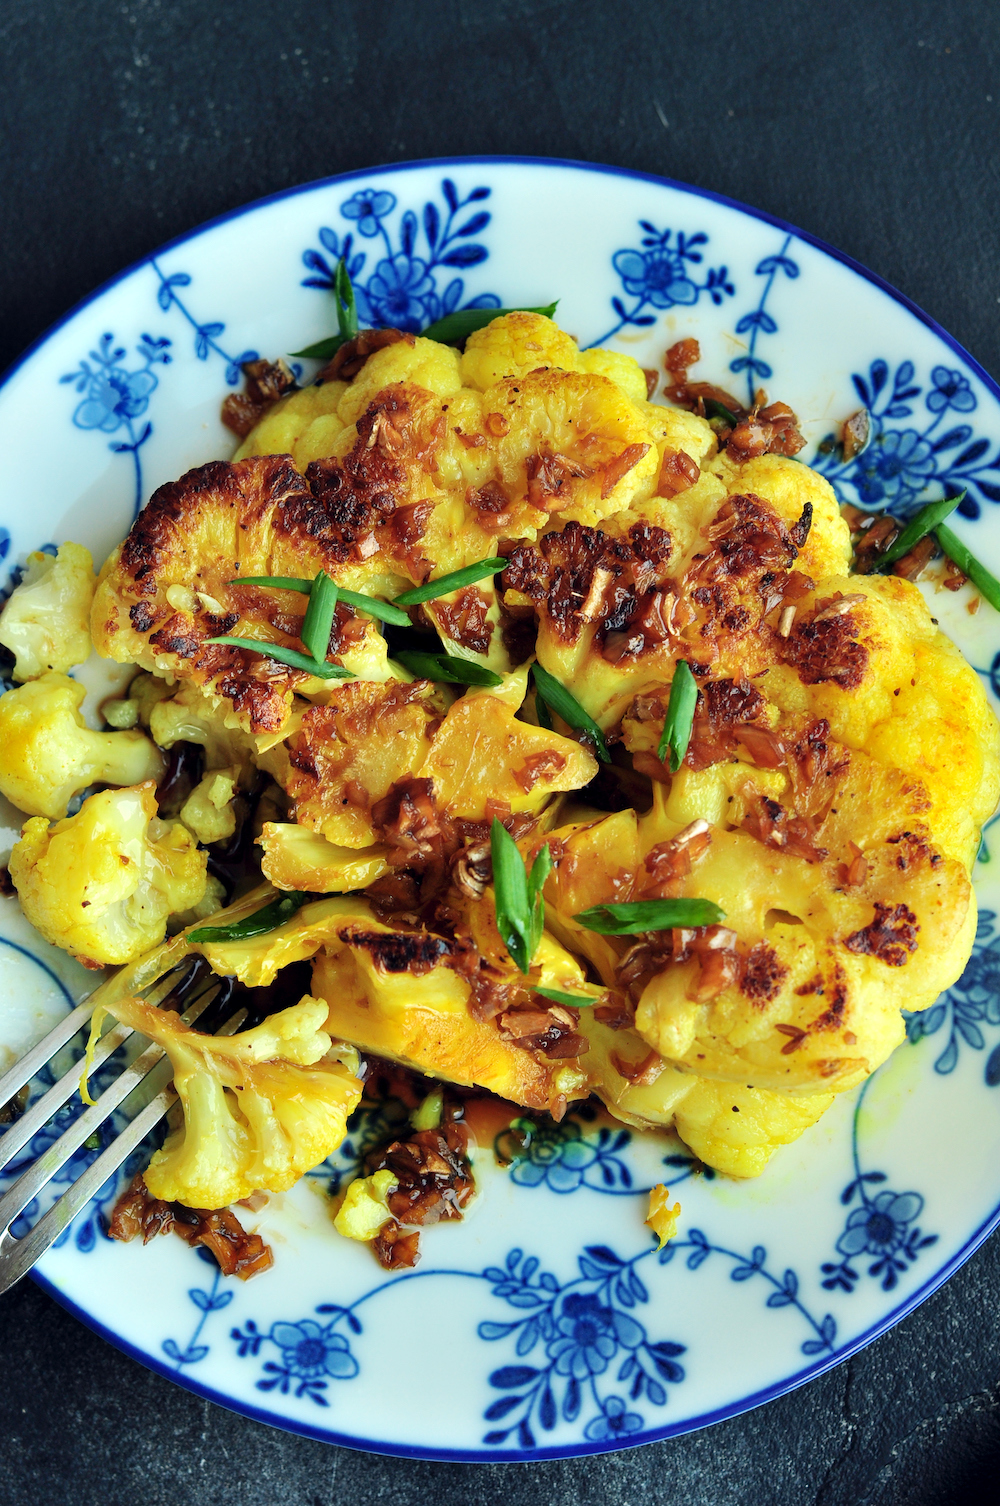 Experience spiced sous vide cauliflower steak with a soy-ginger sauce made gluten-free for some serious umami goodness! 